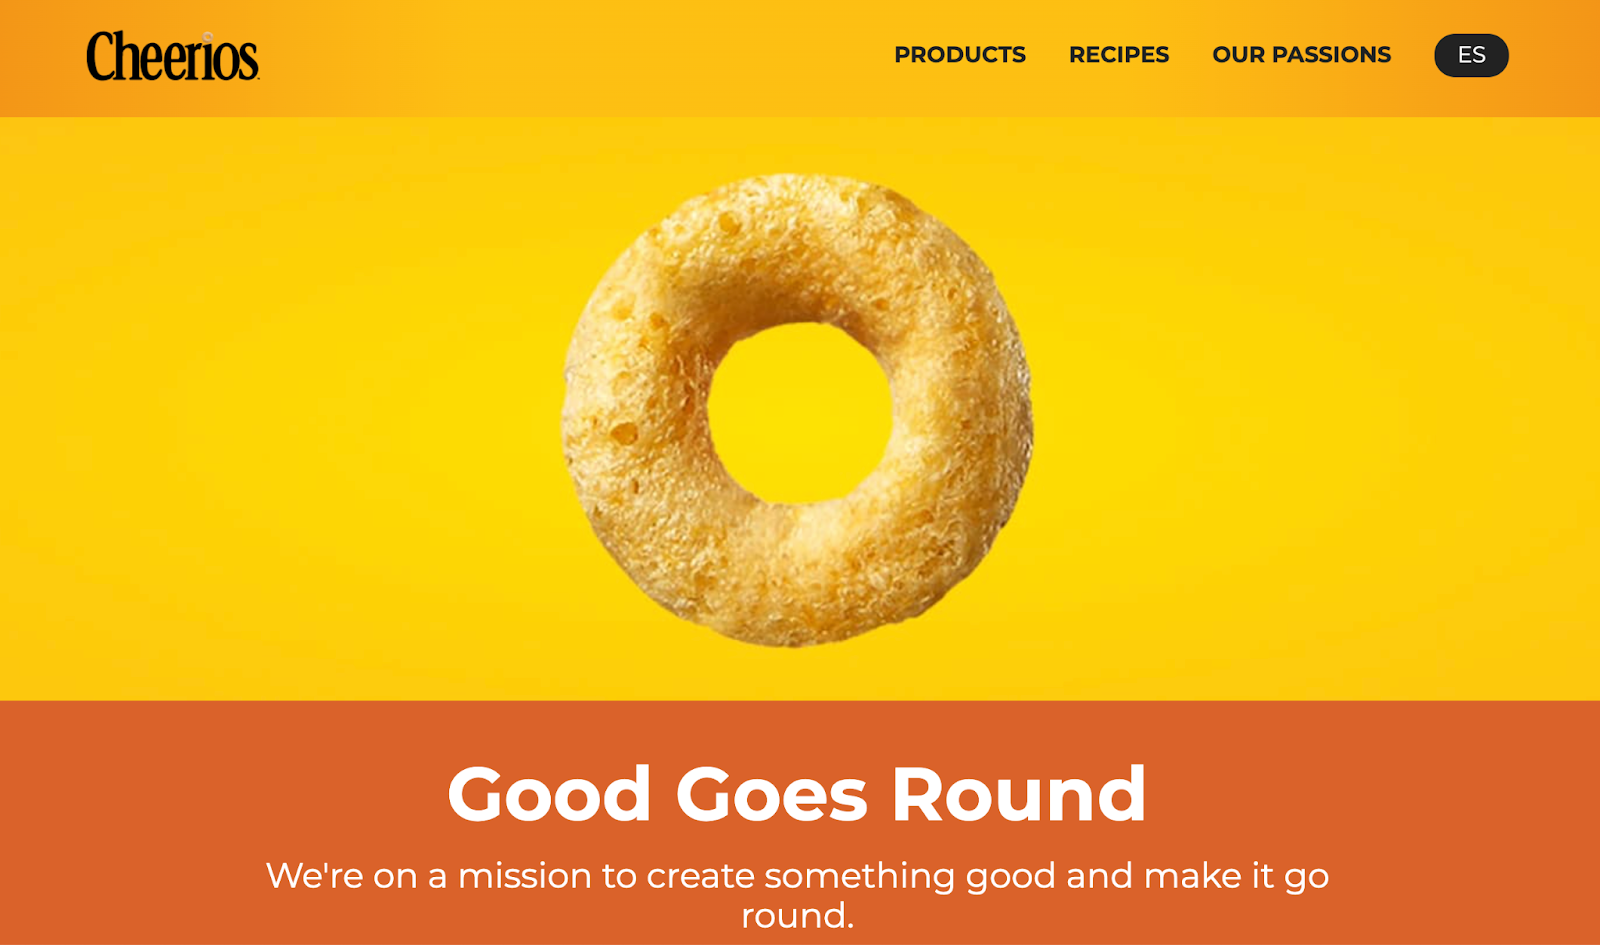 Great Marketing Campaign Example: Good Goes Round